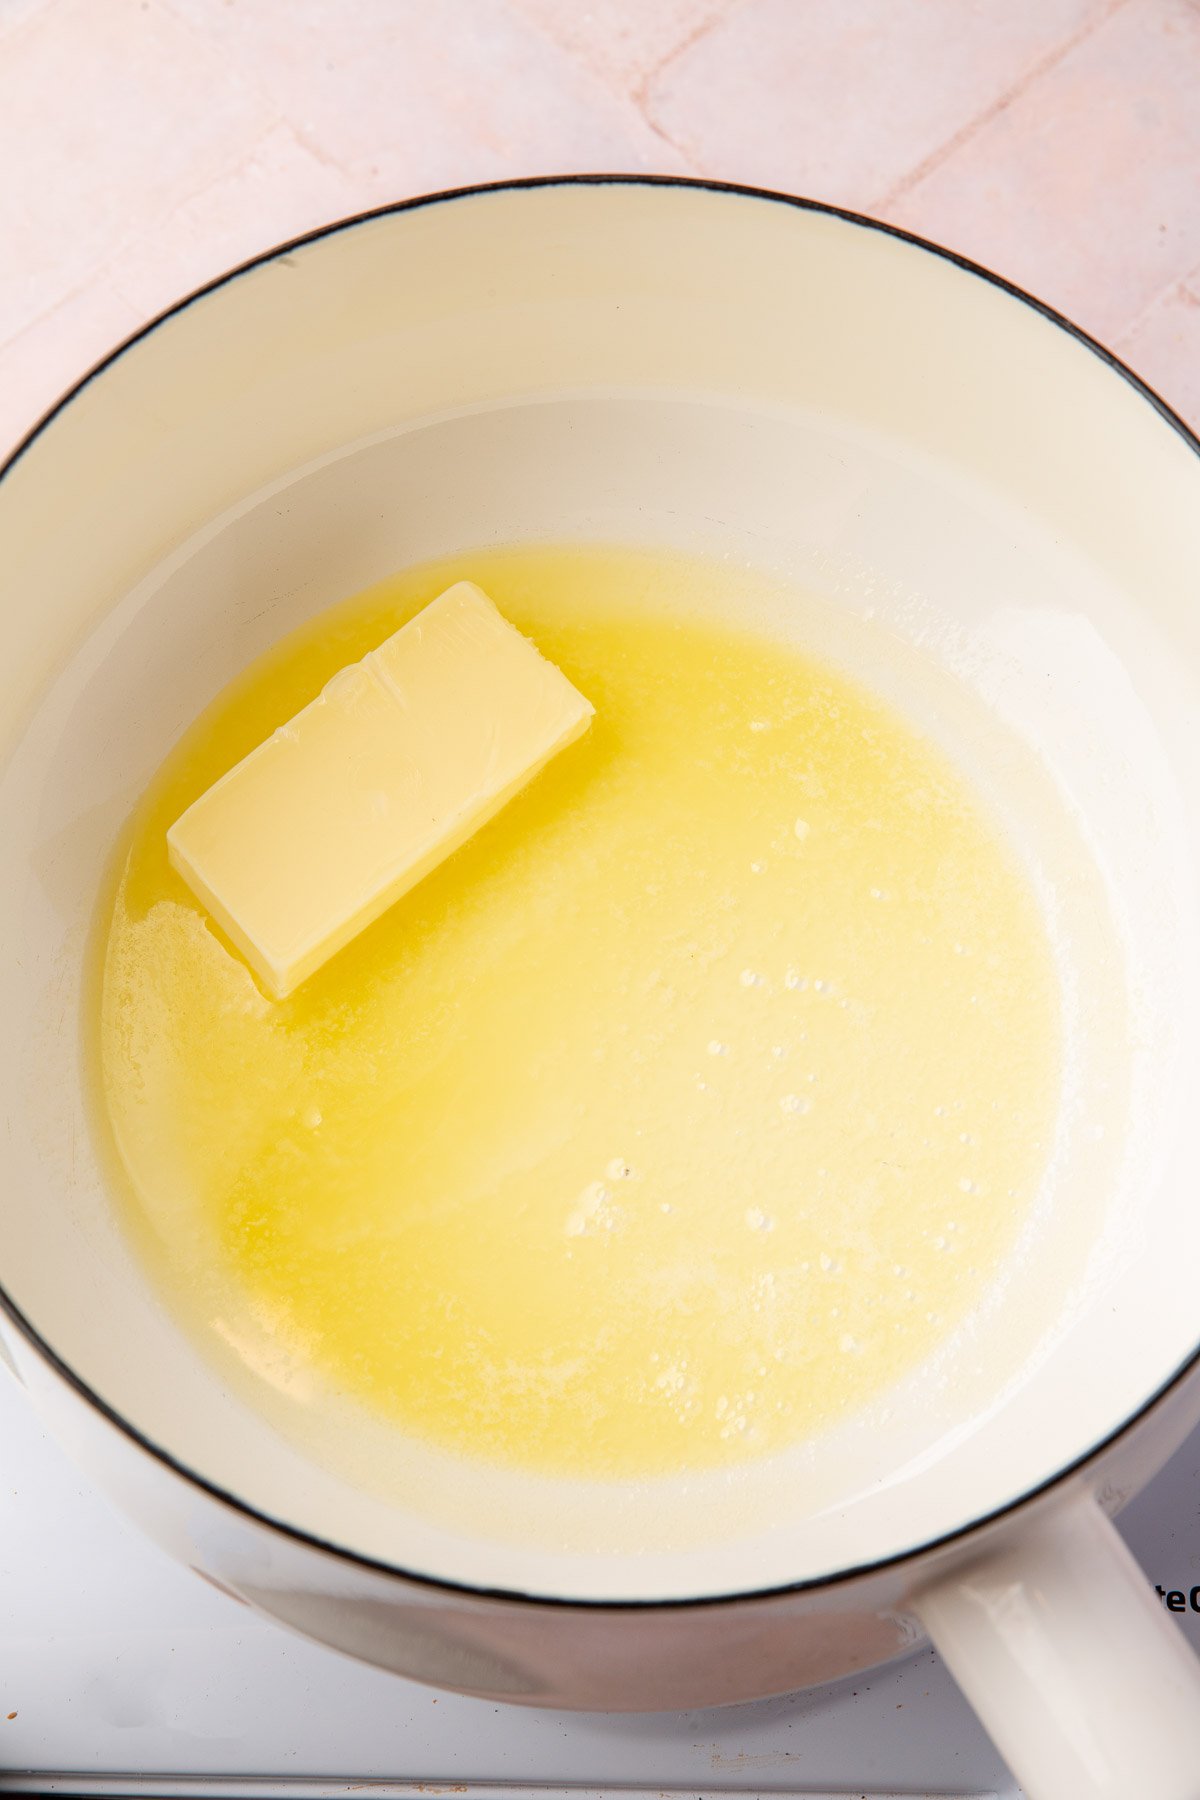 A stick of butter melting in a white saucepan.